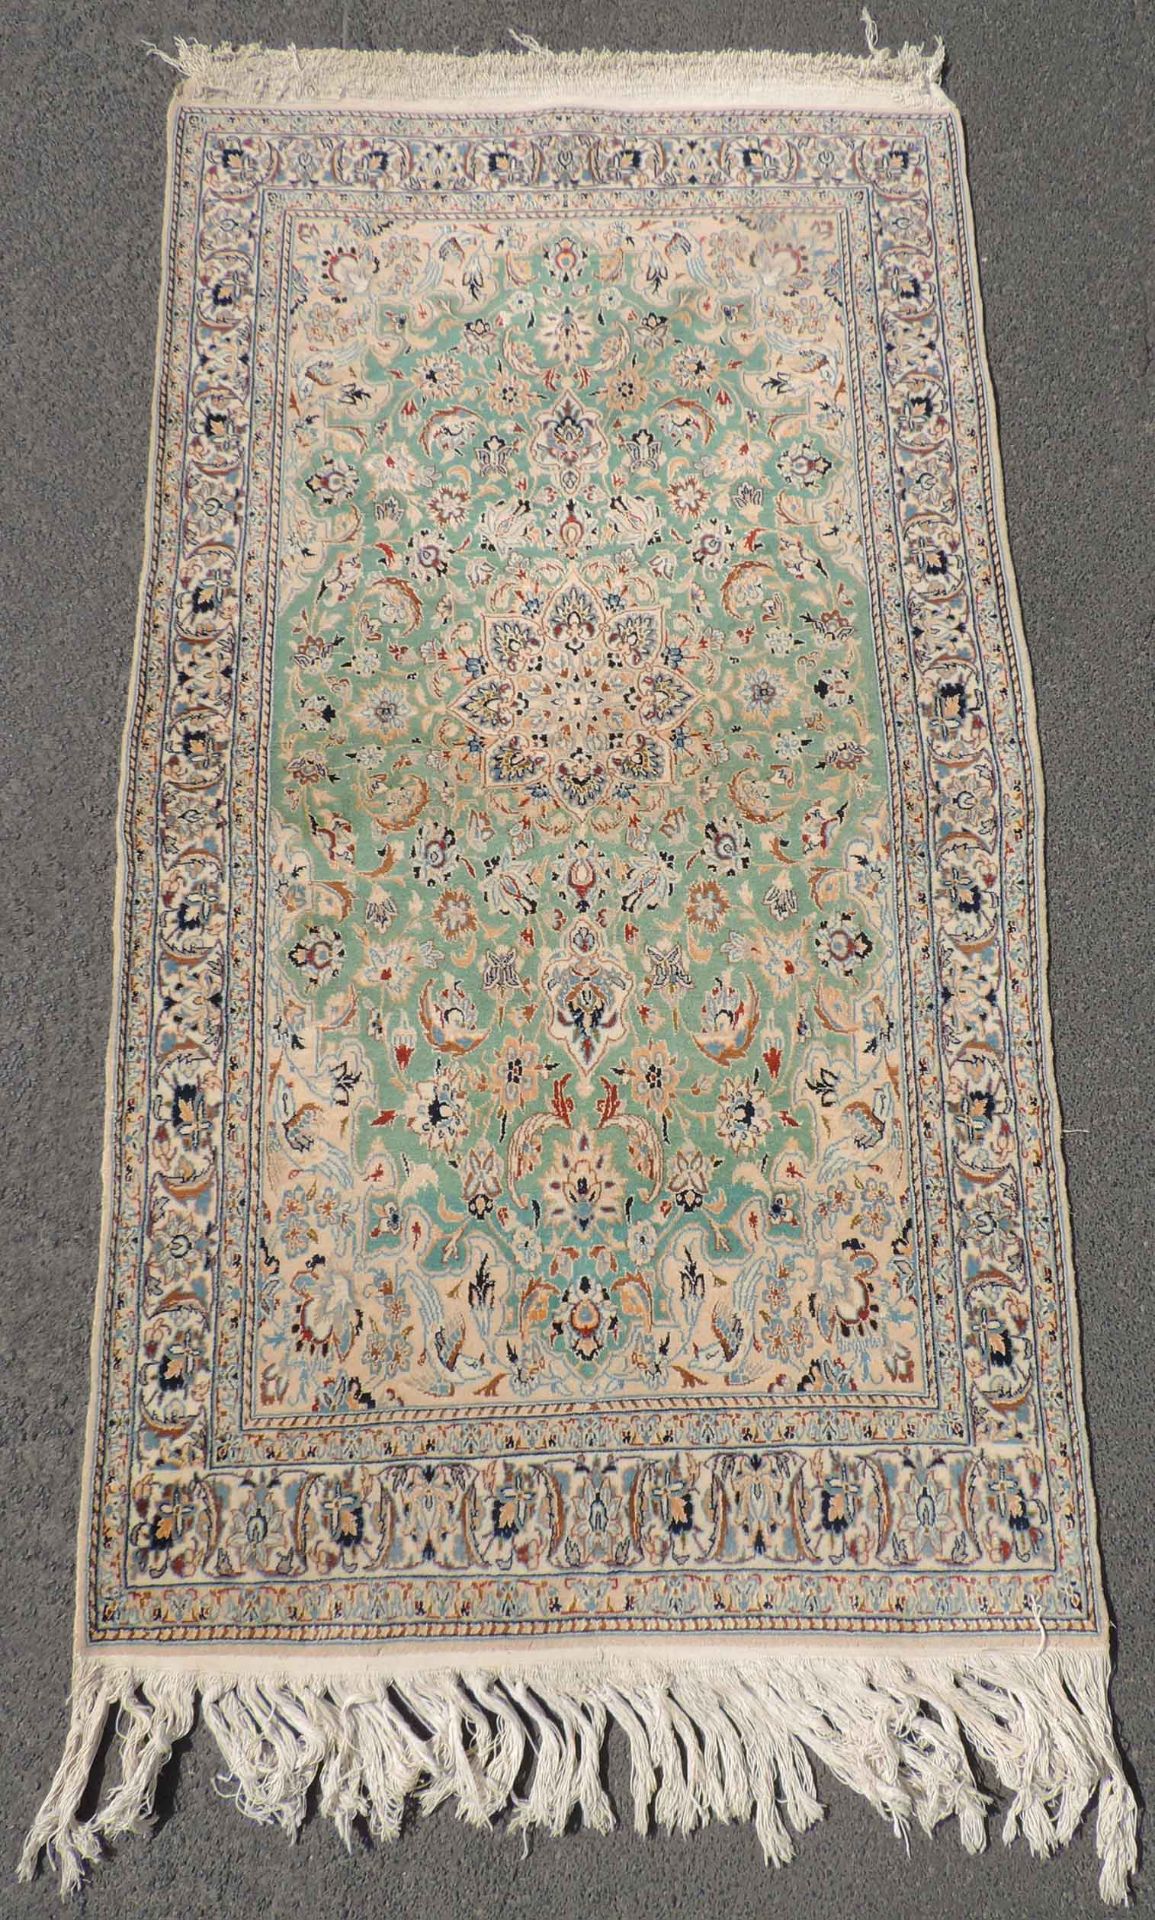 Nain Persian rug. Iran. Very fine weave.214 cm x 113 cm. Knotted by hand. Cork wool and silk on